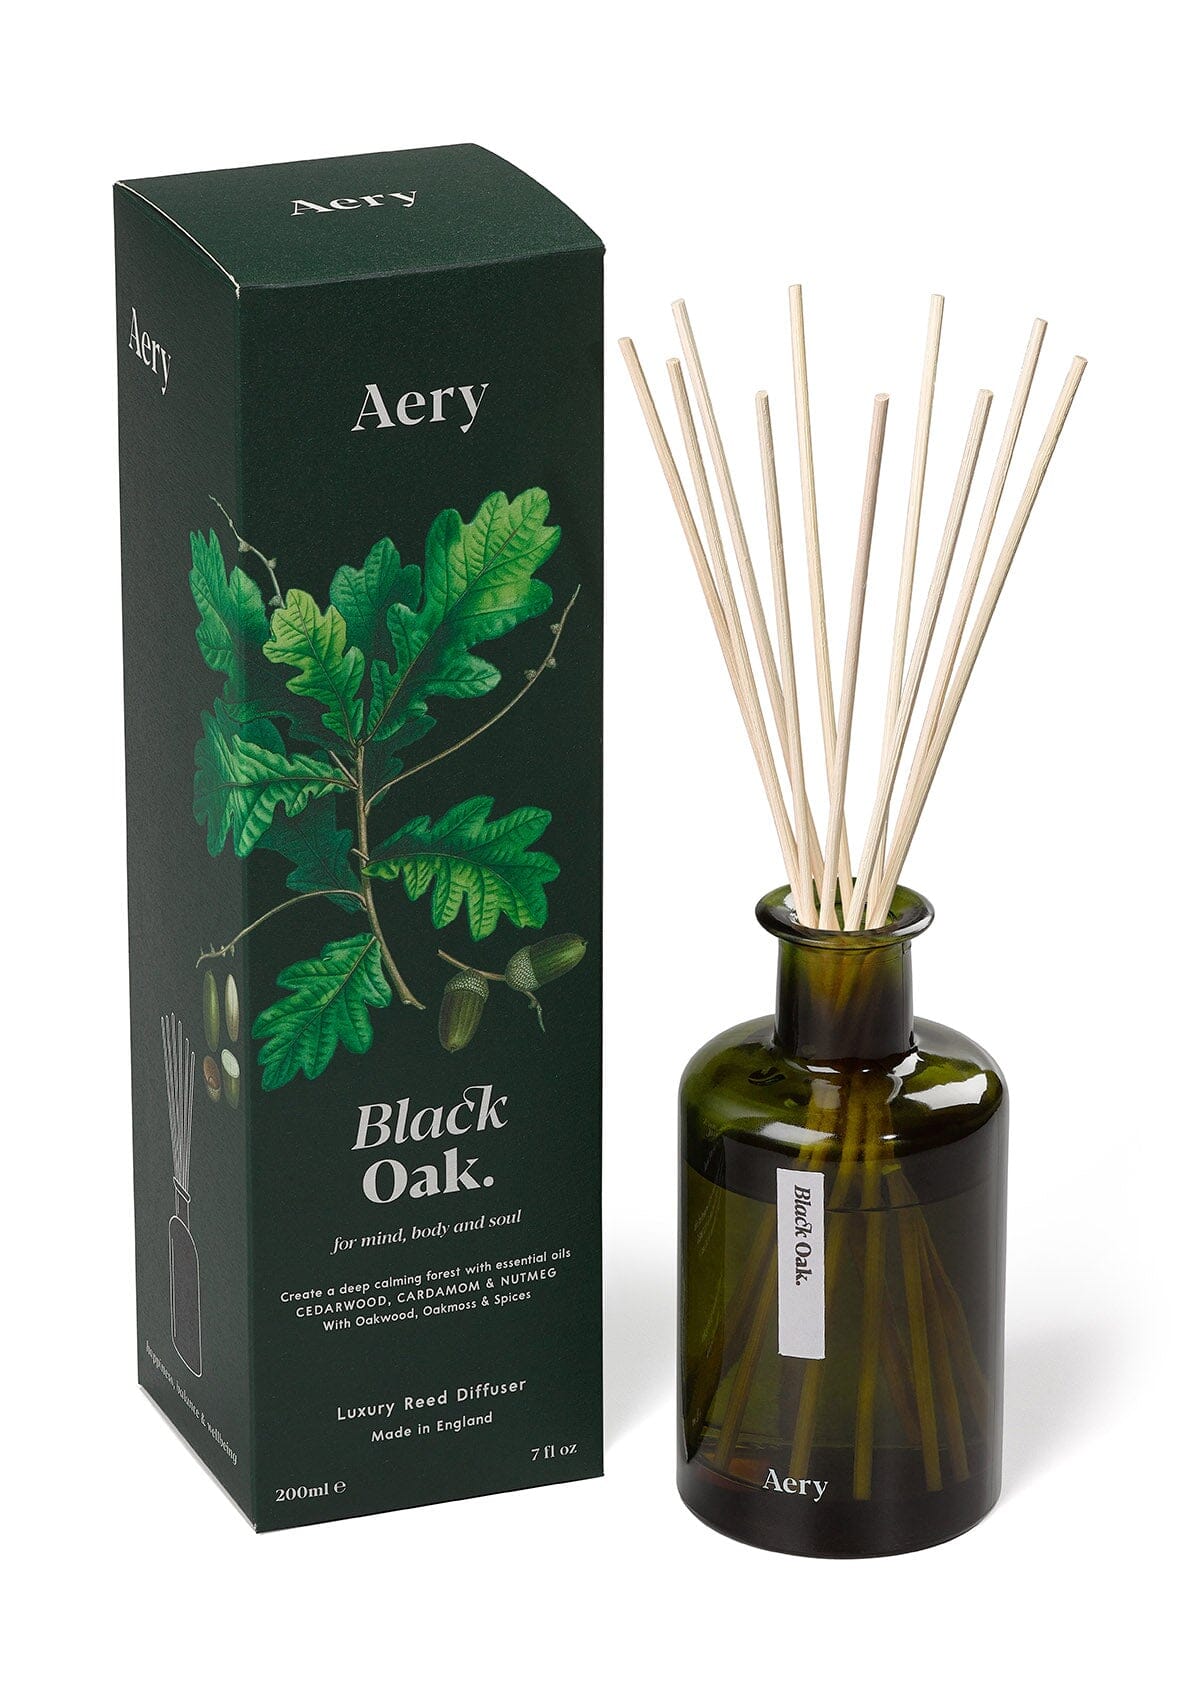 Green Black Oak diffuser displayed next to product packaging by Aery on white background 